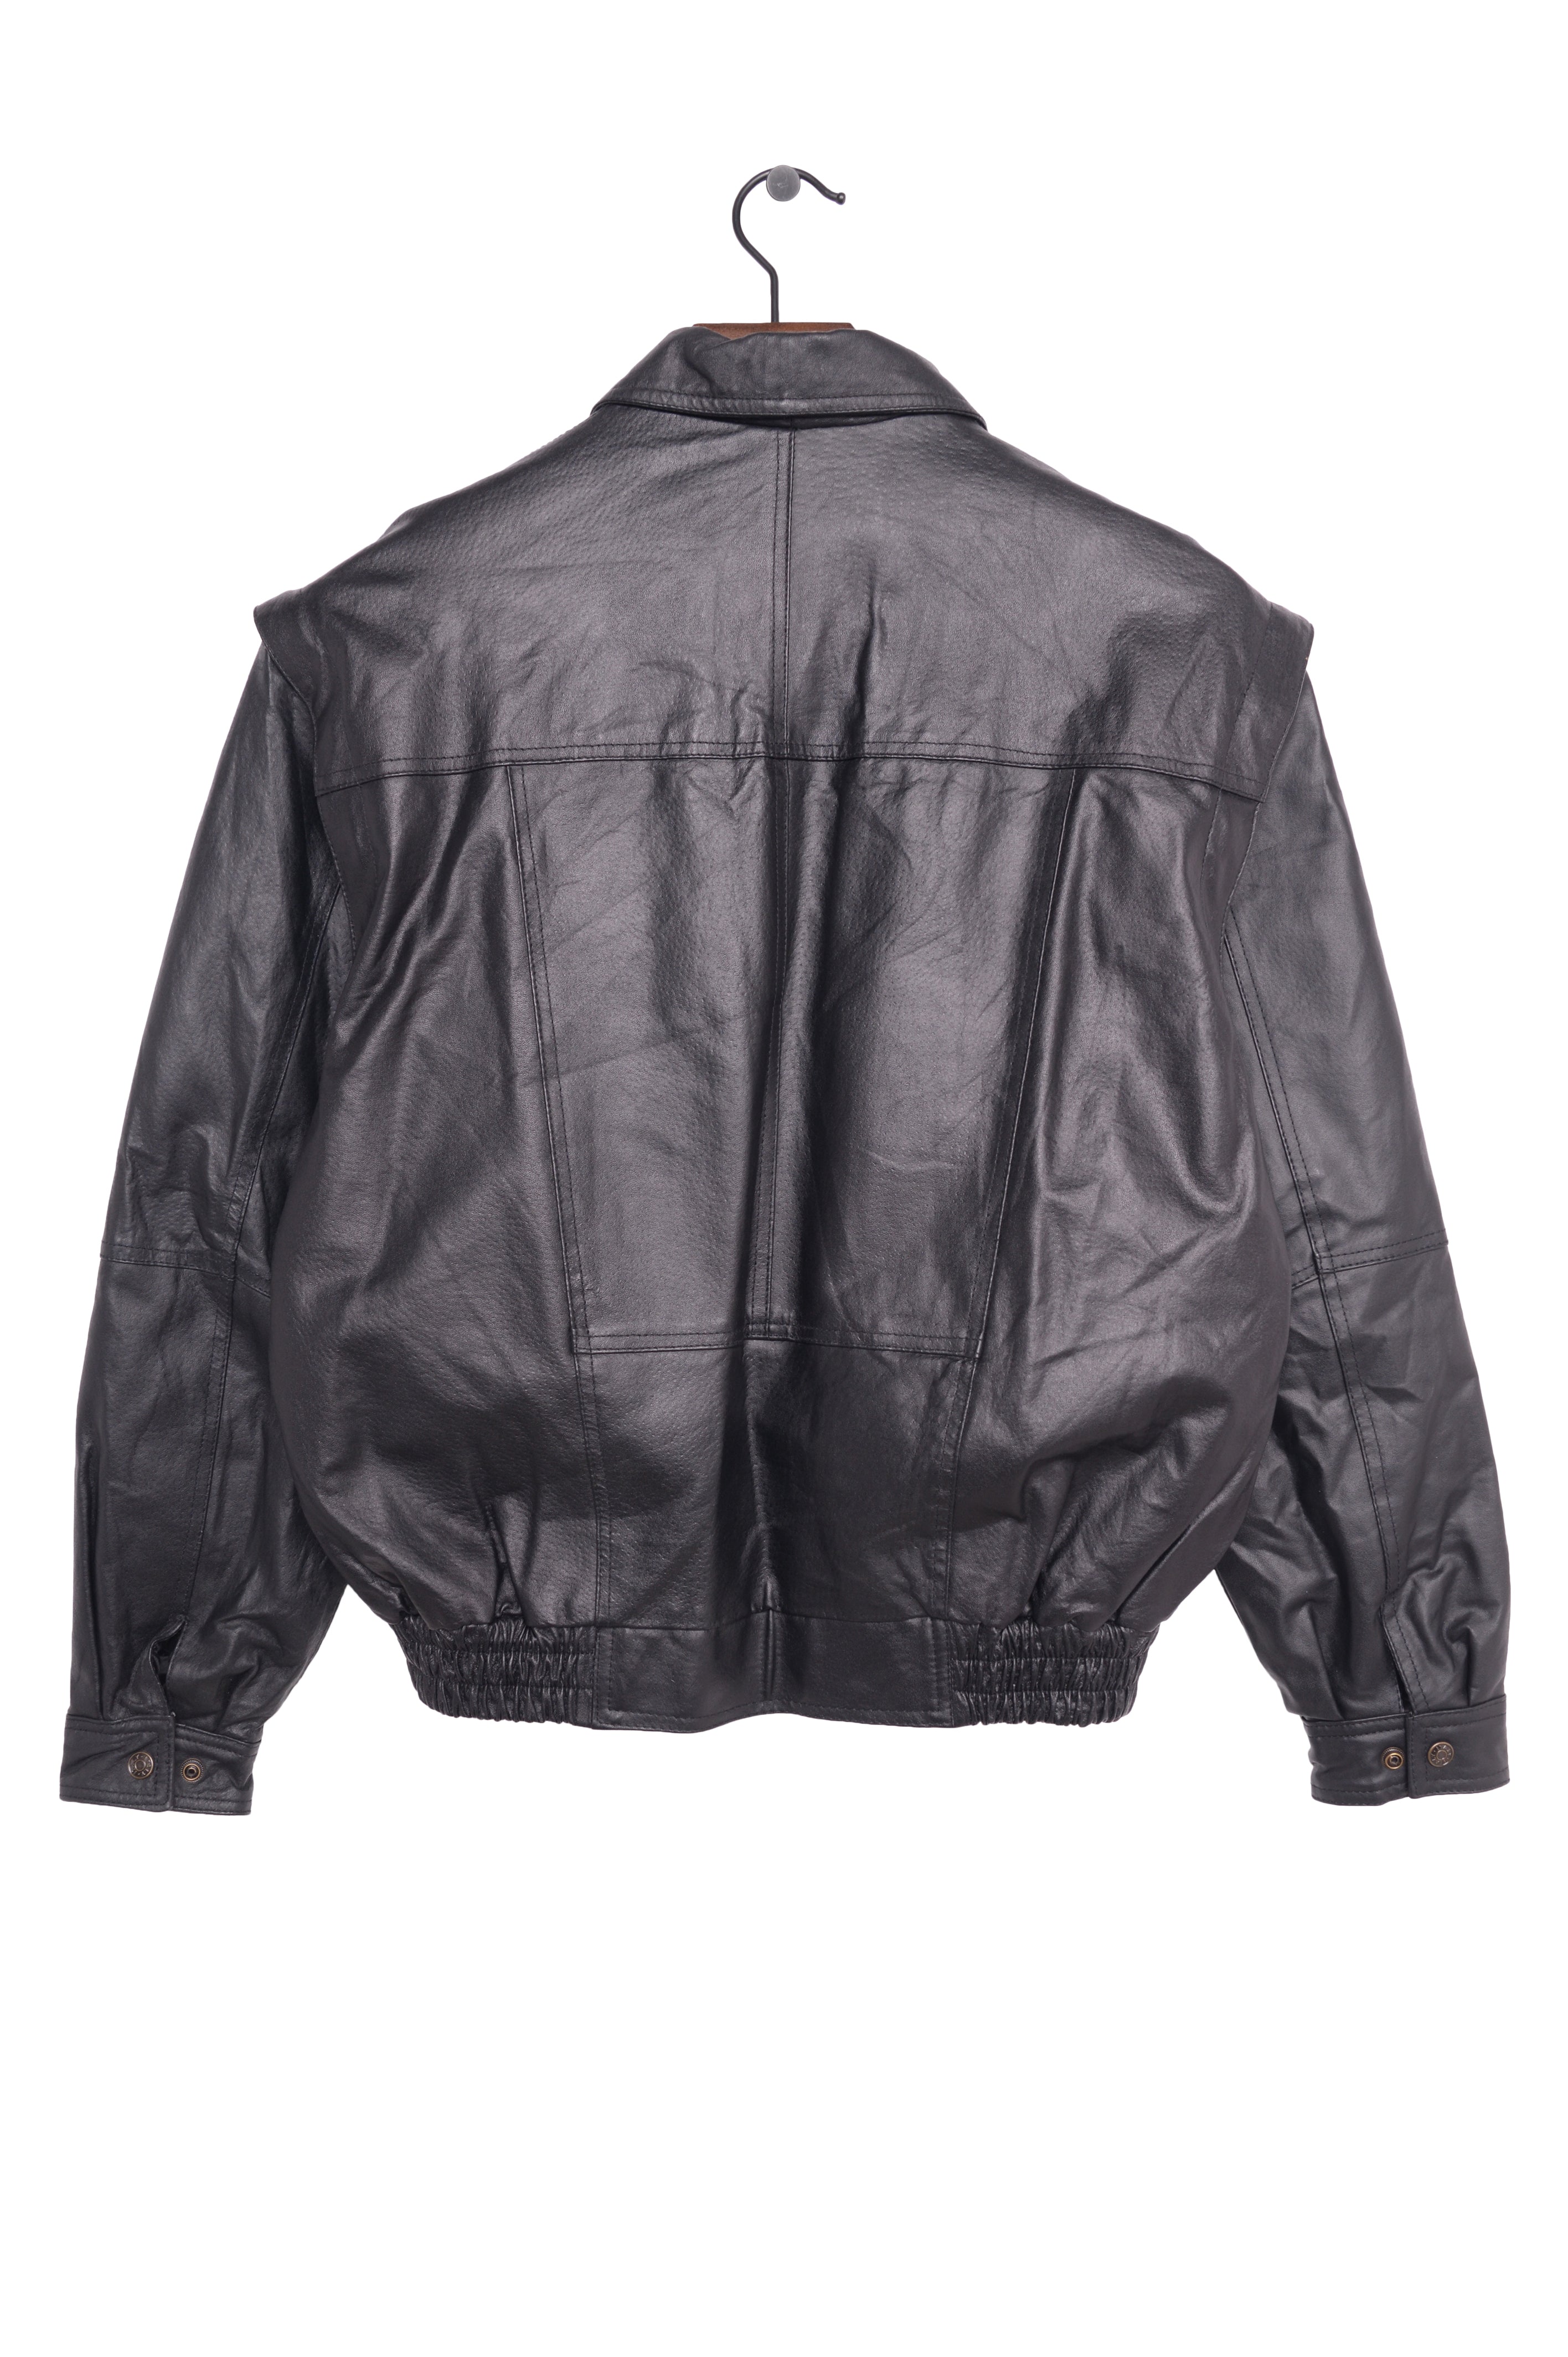 1990s Zip-Off Sleeve Leather Bomber Free Shipping - The Vintage Twin